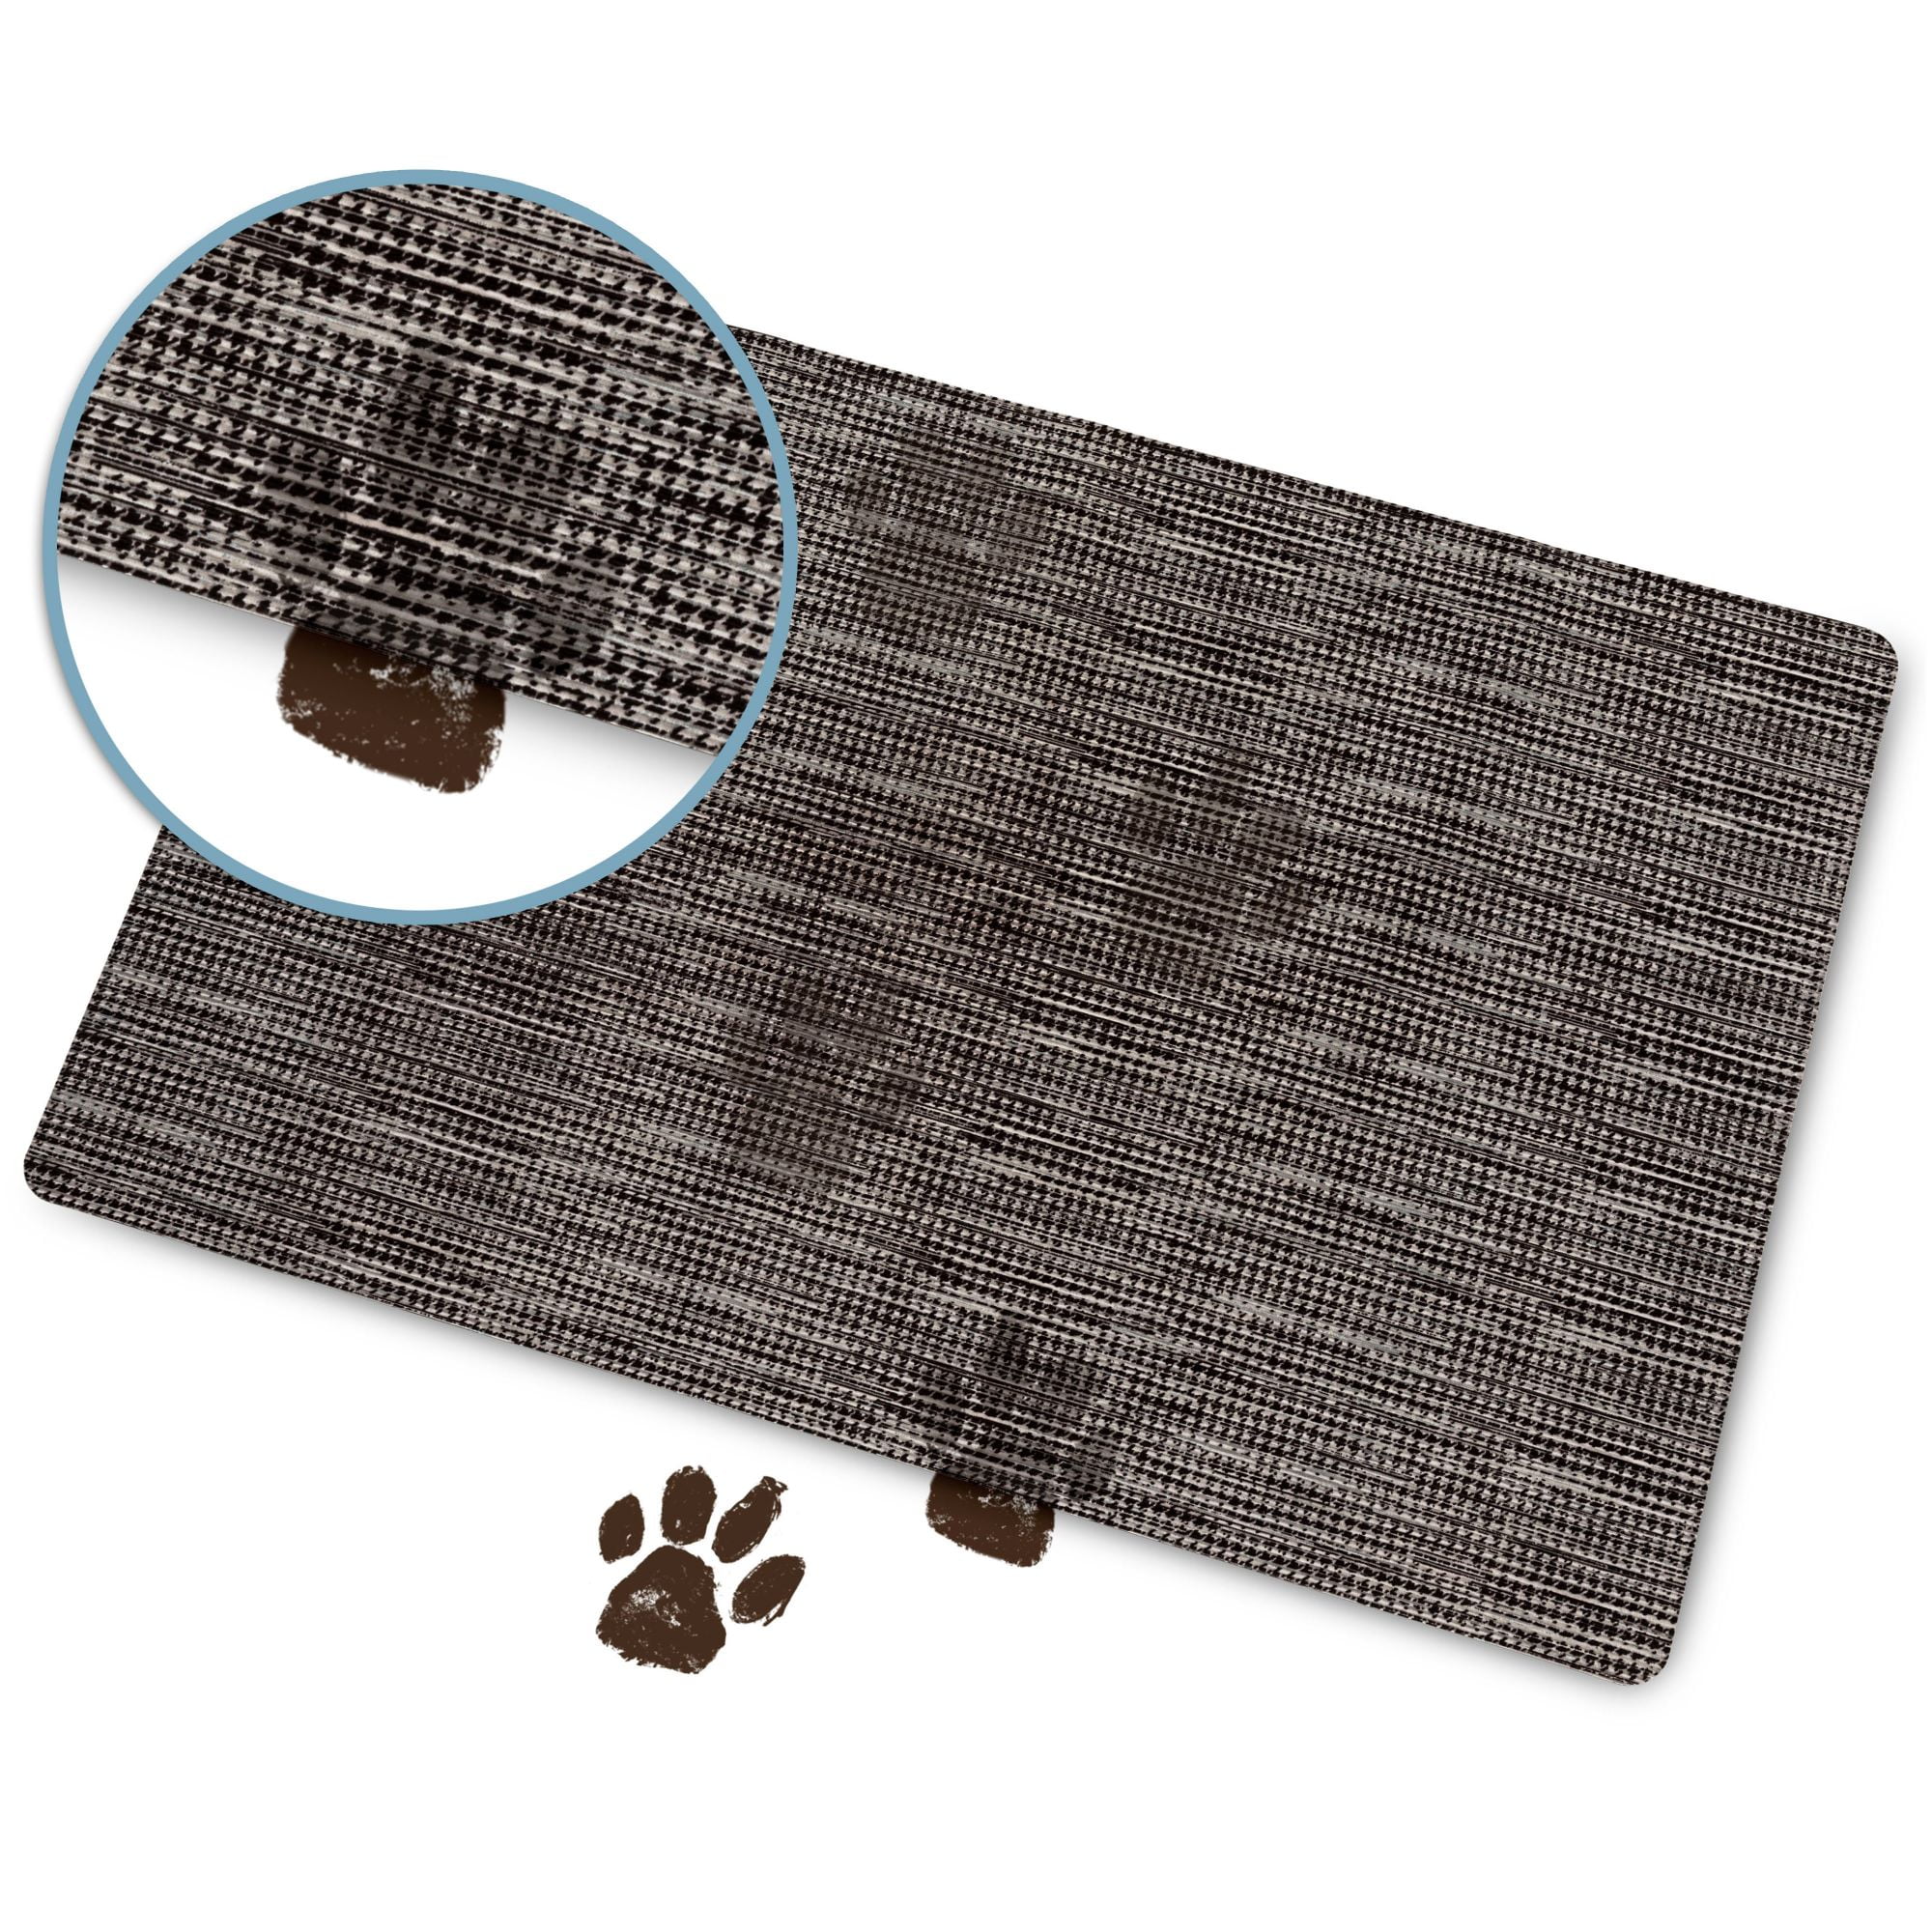 Benissimo-Modern Mats, 24”x56” Ultra-Thin (1/10 Inch) Kitchen Mat Rubber  Backing, Waterproof, Low Profile, Durable&Non Slip, Indoor Floor Mat for  Entry, Patio, Grit Wood Came House 